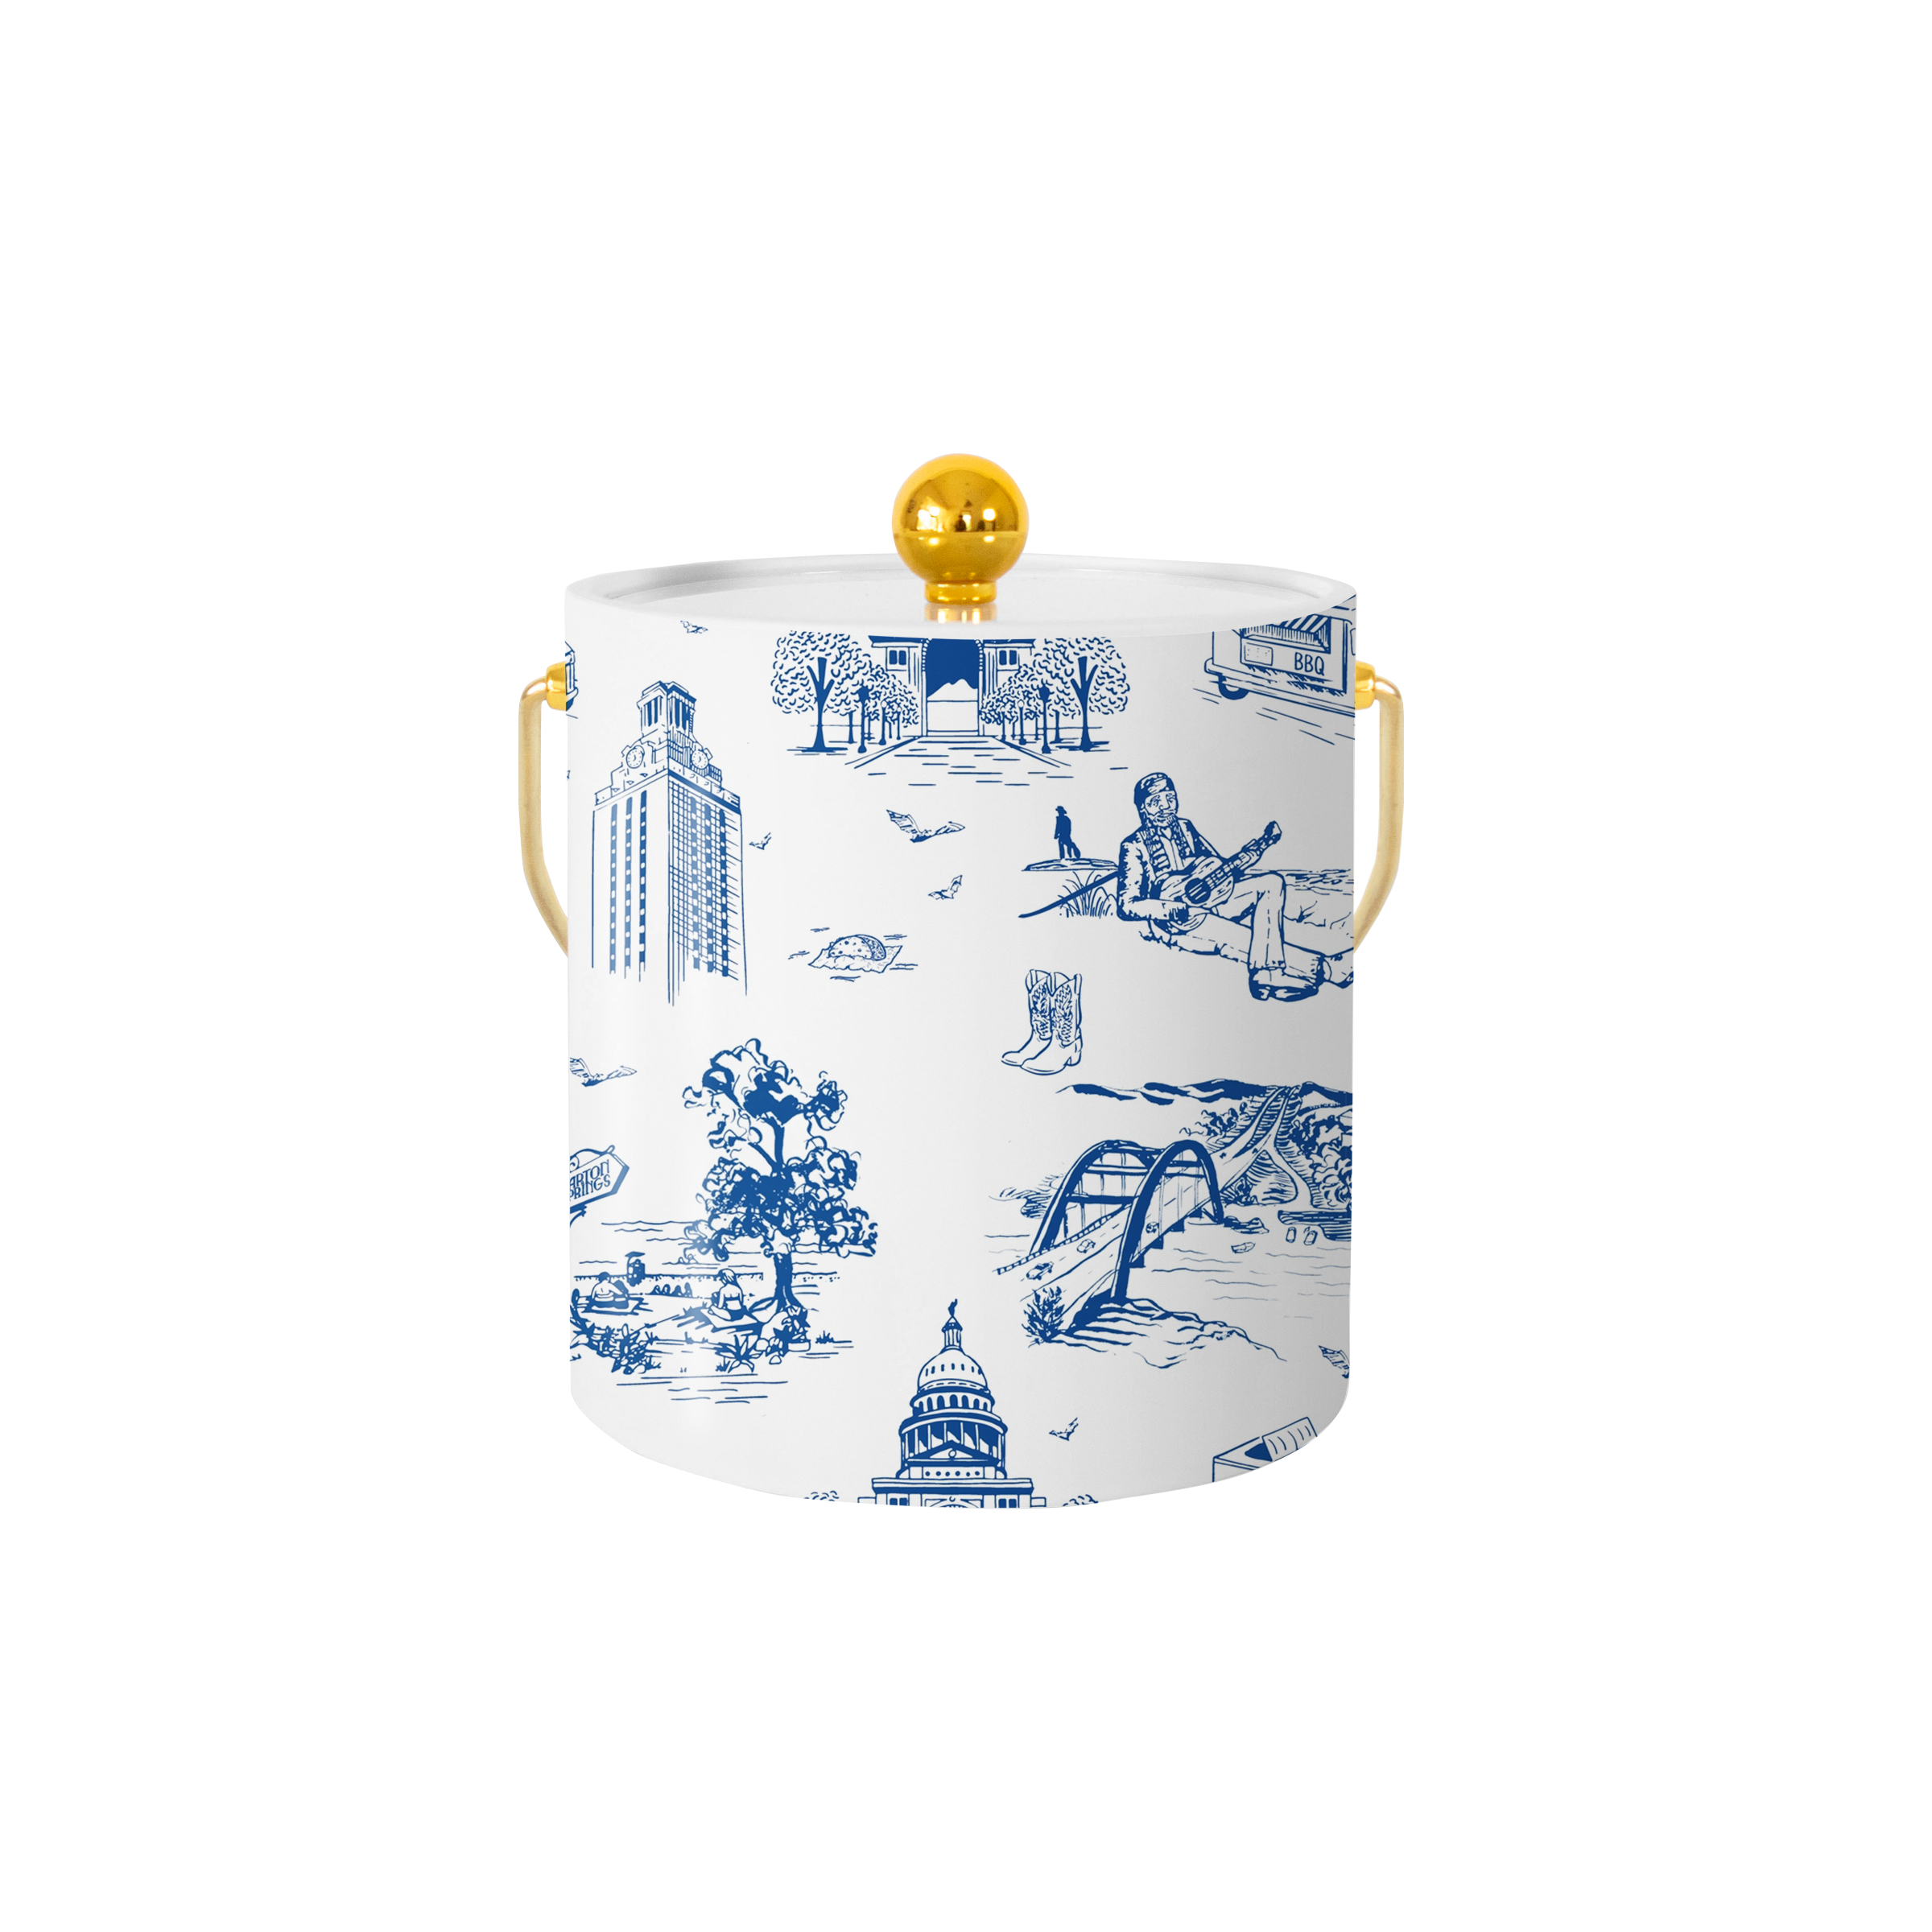 https://cdn.shopify.com/s/files/1/0665/3515/products/austin-toile-ice-bucket-ice-bucket-katie-kime-29680889888865.png?v=1697126790